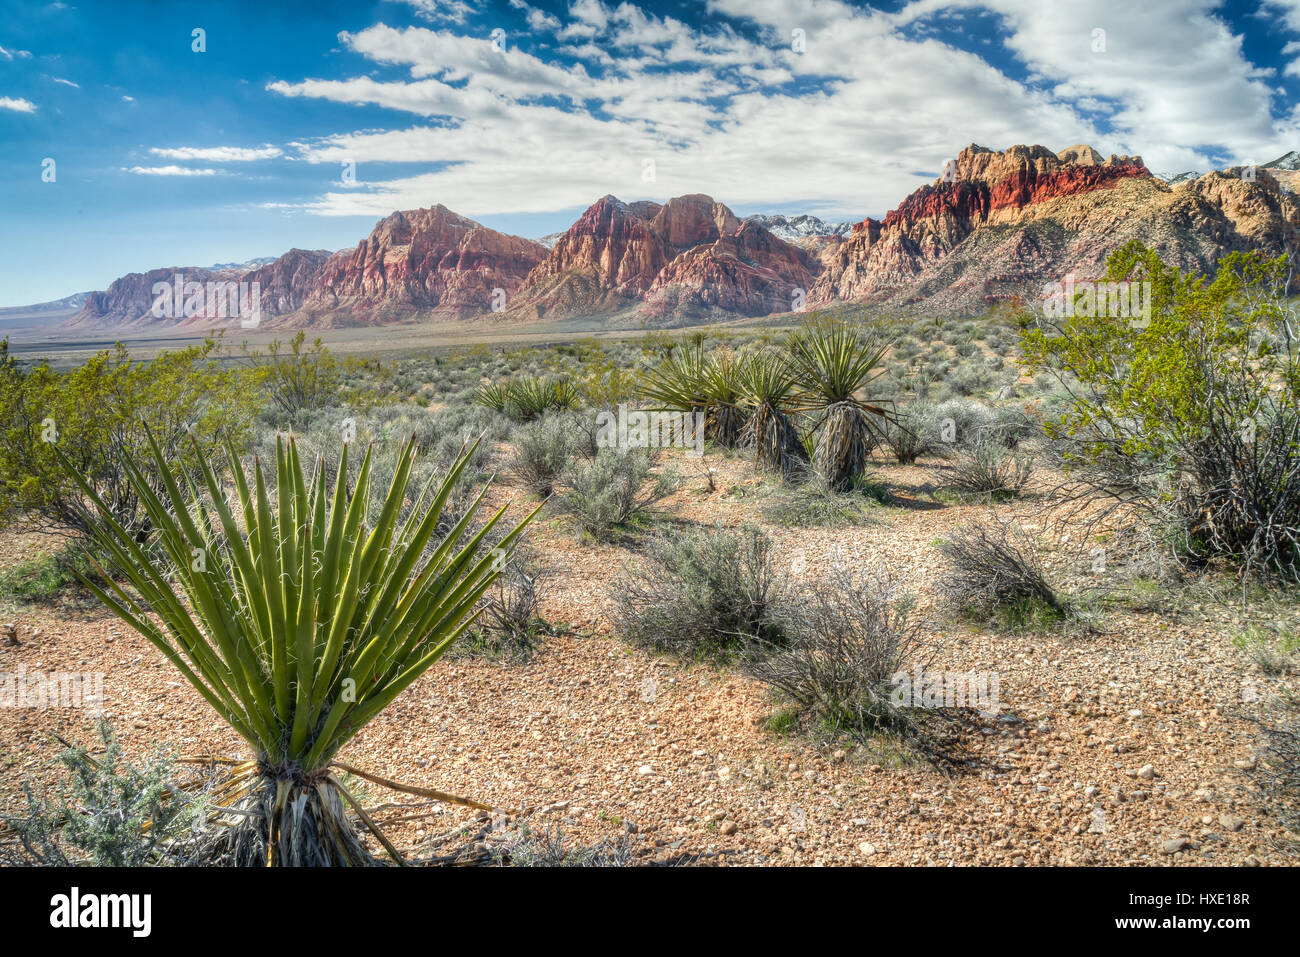 Montagne lungo il Red Rock Canyon National Conservation ad ovest di Las Vegas, Nevada. Foto Stock